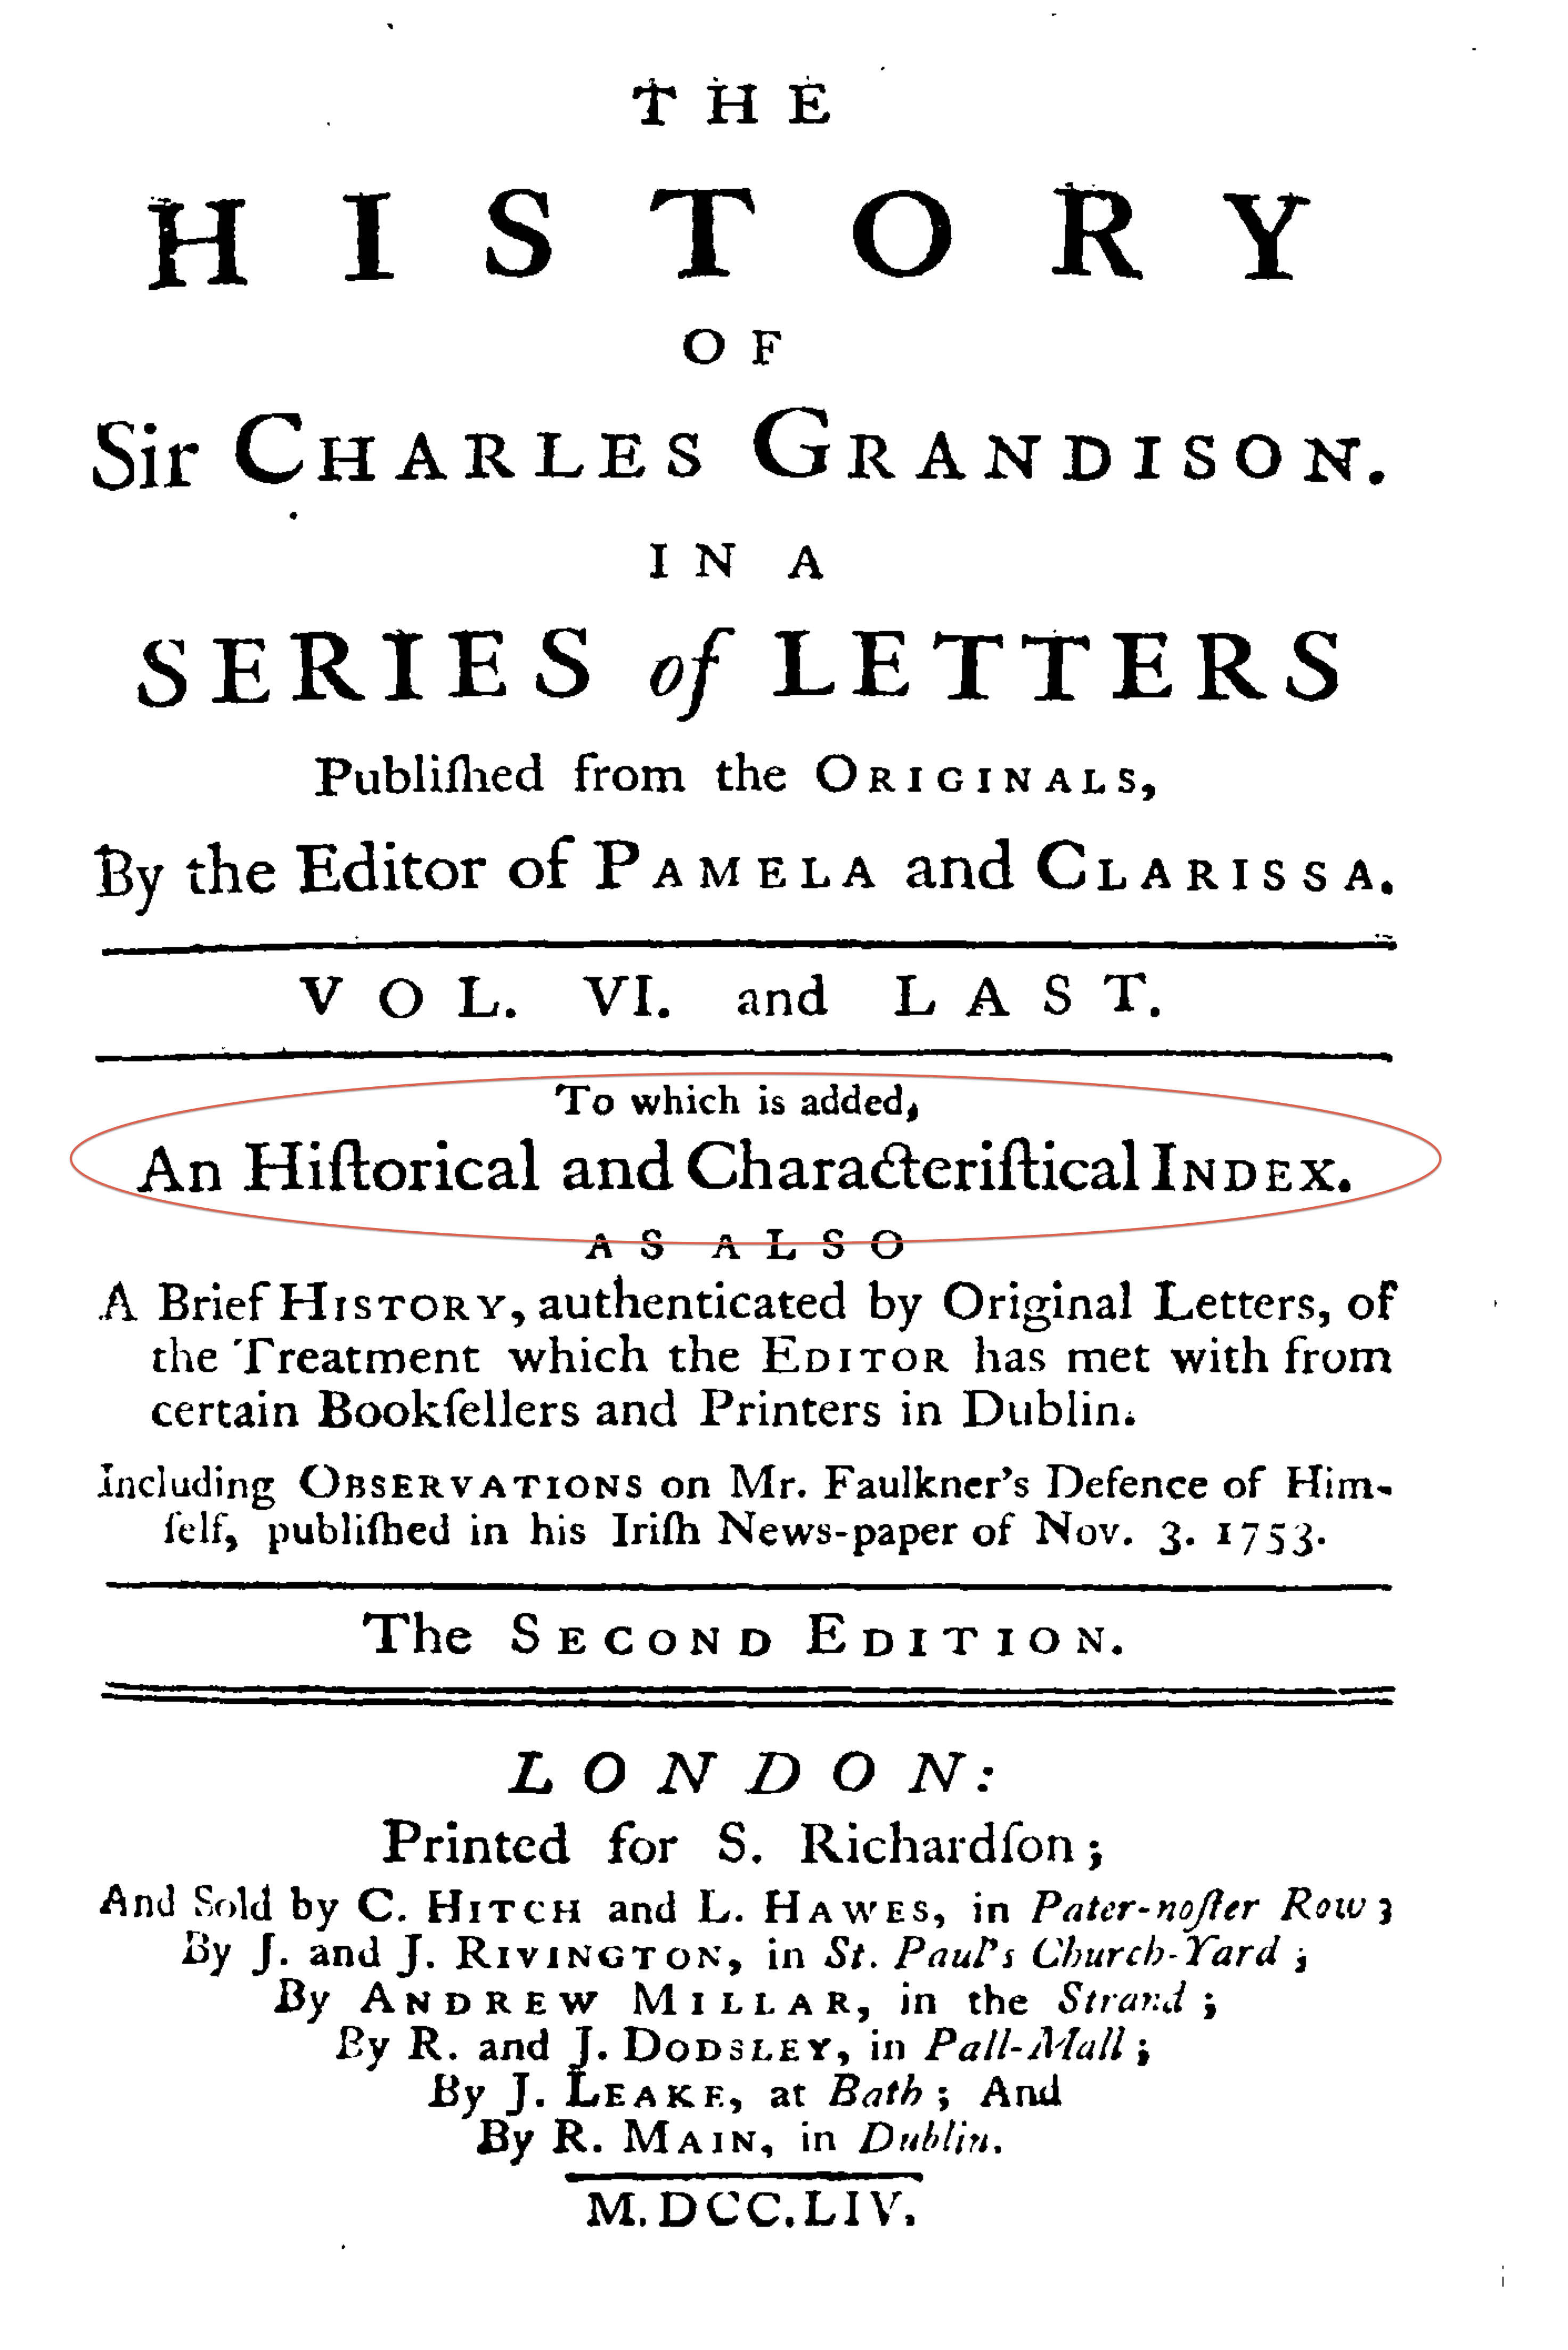 Title Page of The History of Sir Charles Grandison, 2nd edition